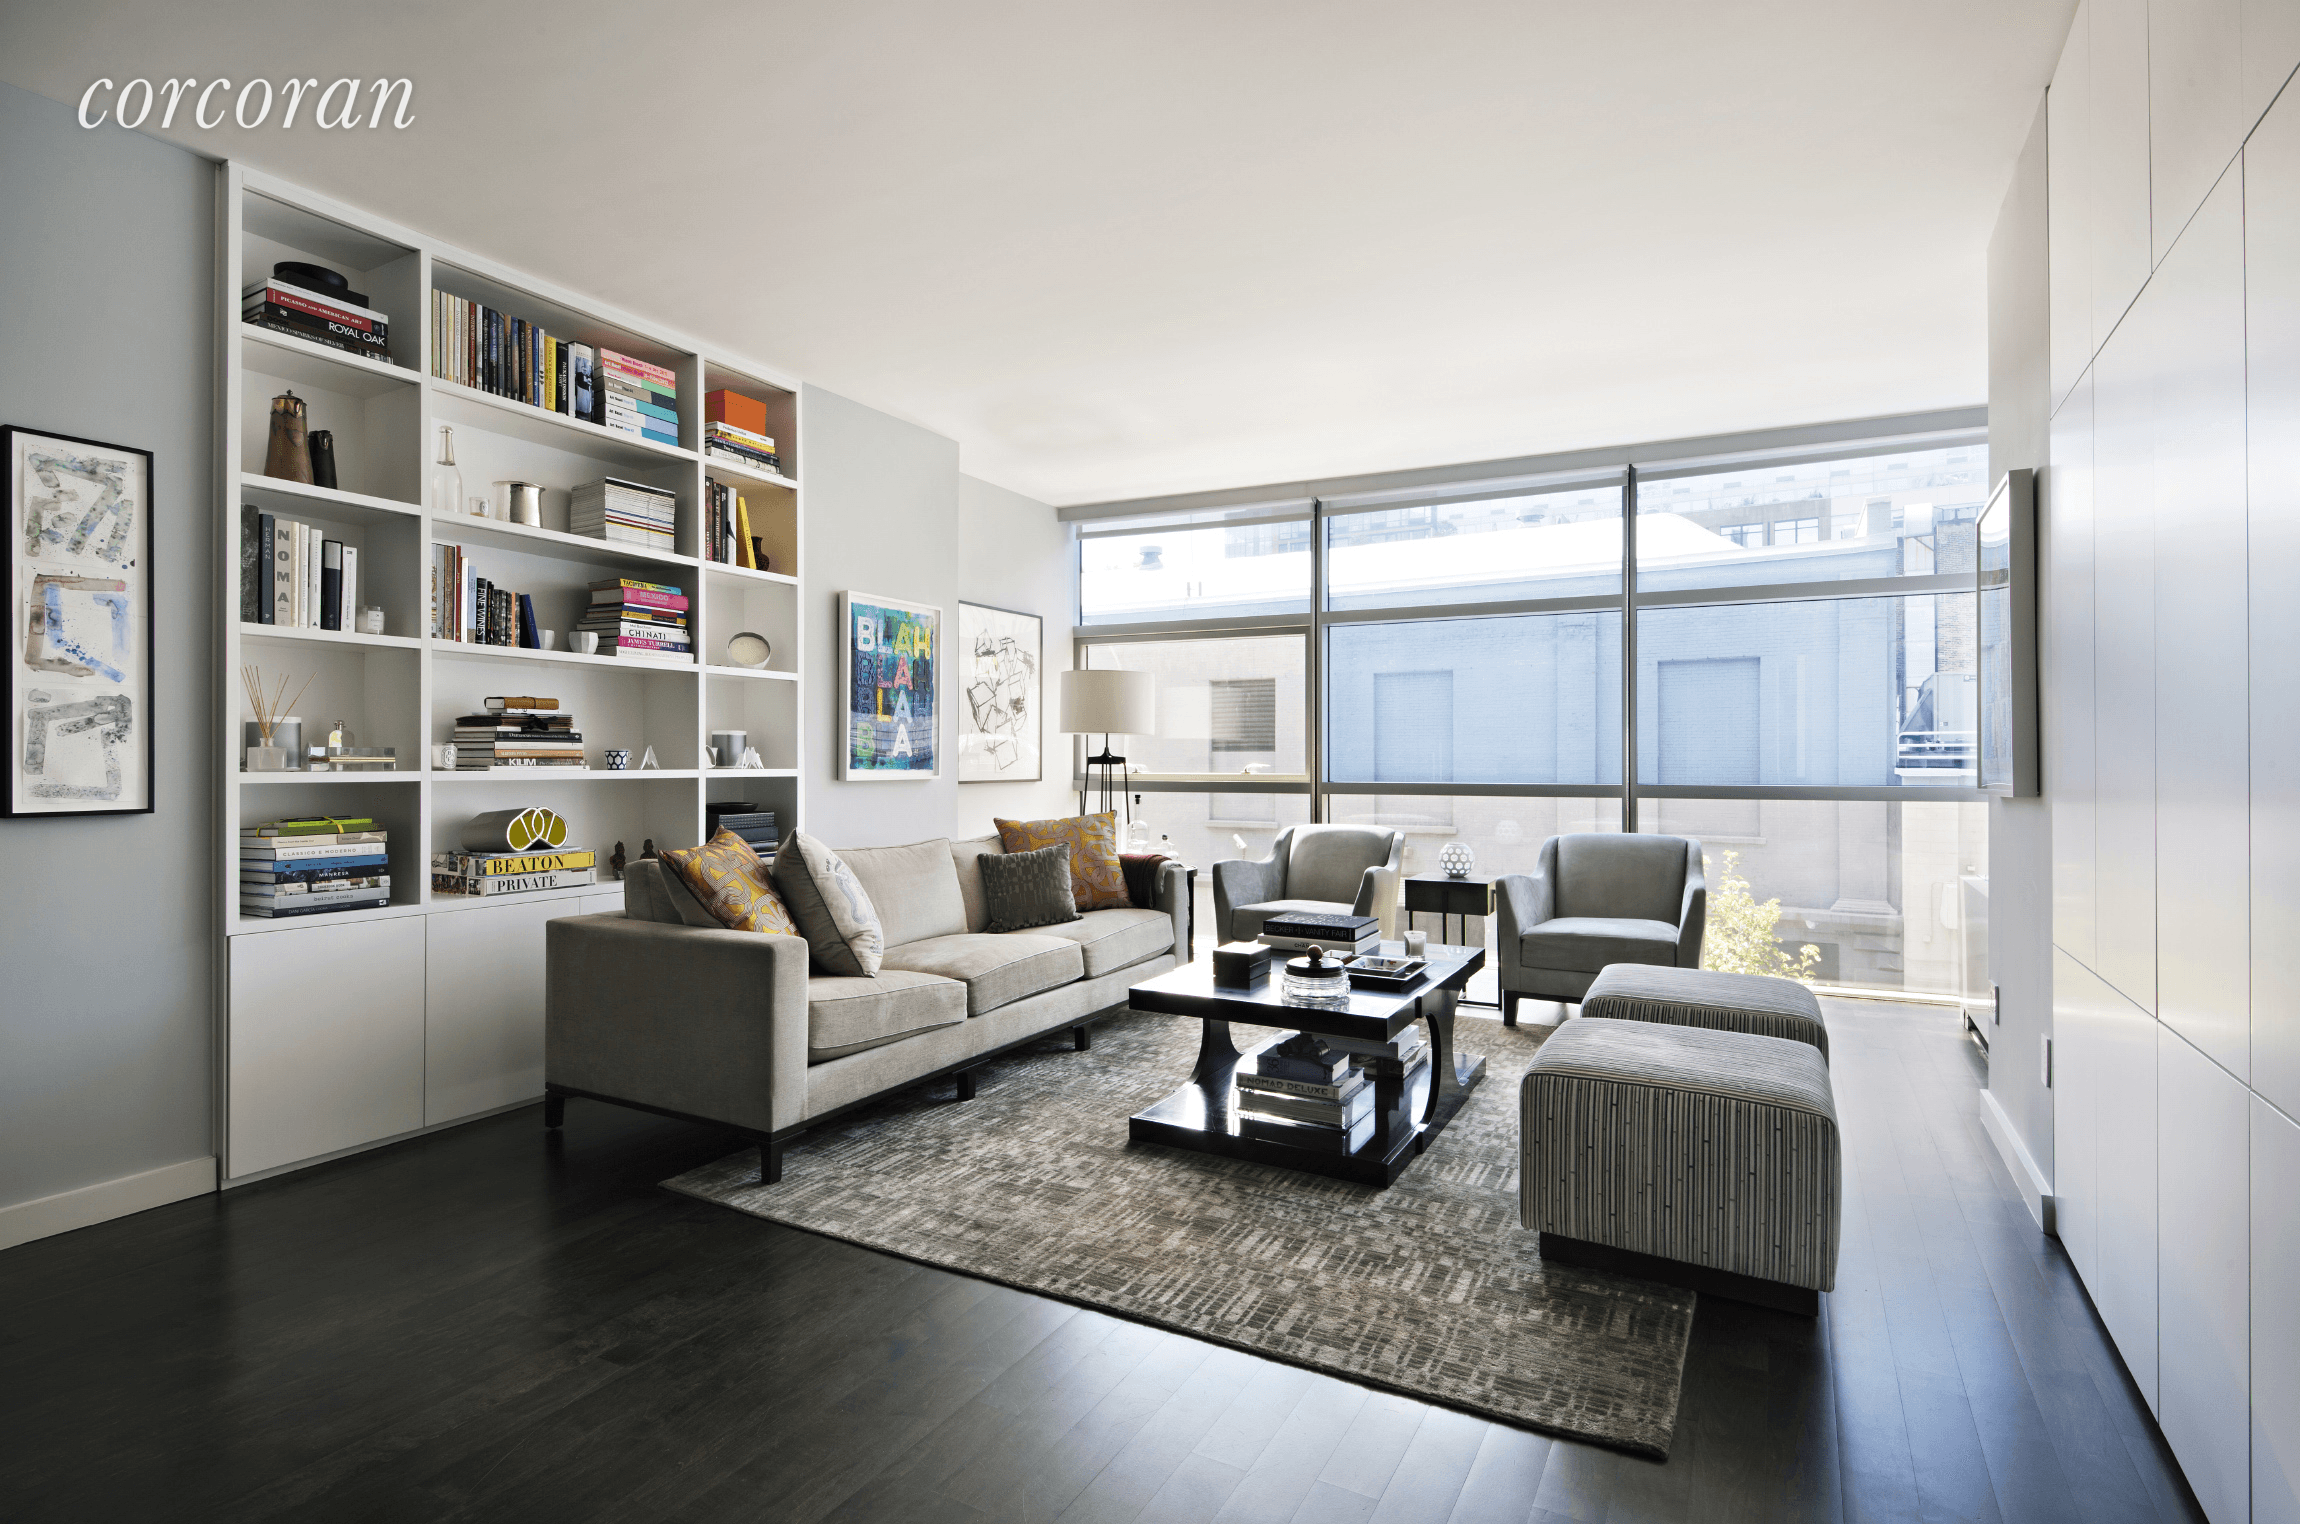 Set in the revered Chelsea Modern, this bright and spacious two bedroom, two and a half bathroom condominium is a contemporary showplace with a full roster of coveted amenities.